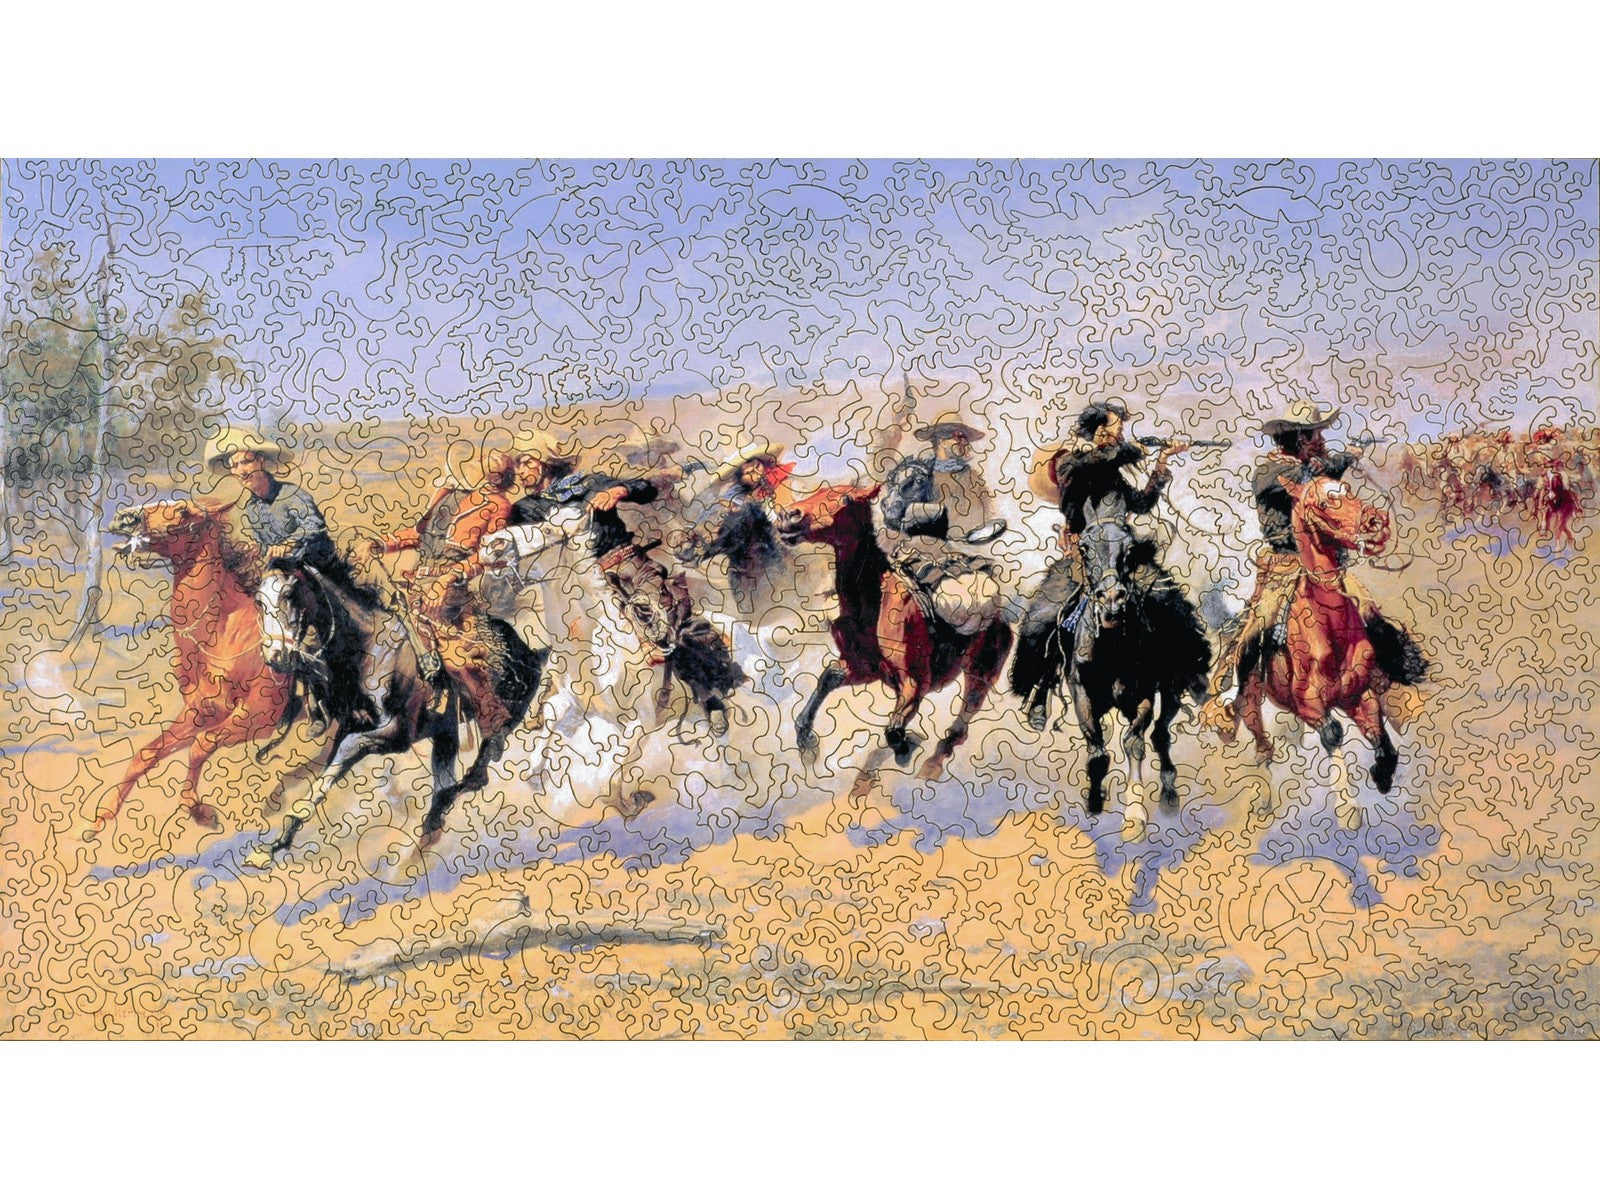 The front of the puzzle, A Dash for the Timber, which shows a group of cowboys riding horses being chased through the desert.